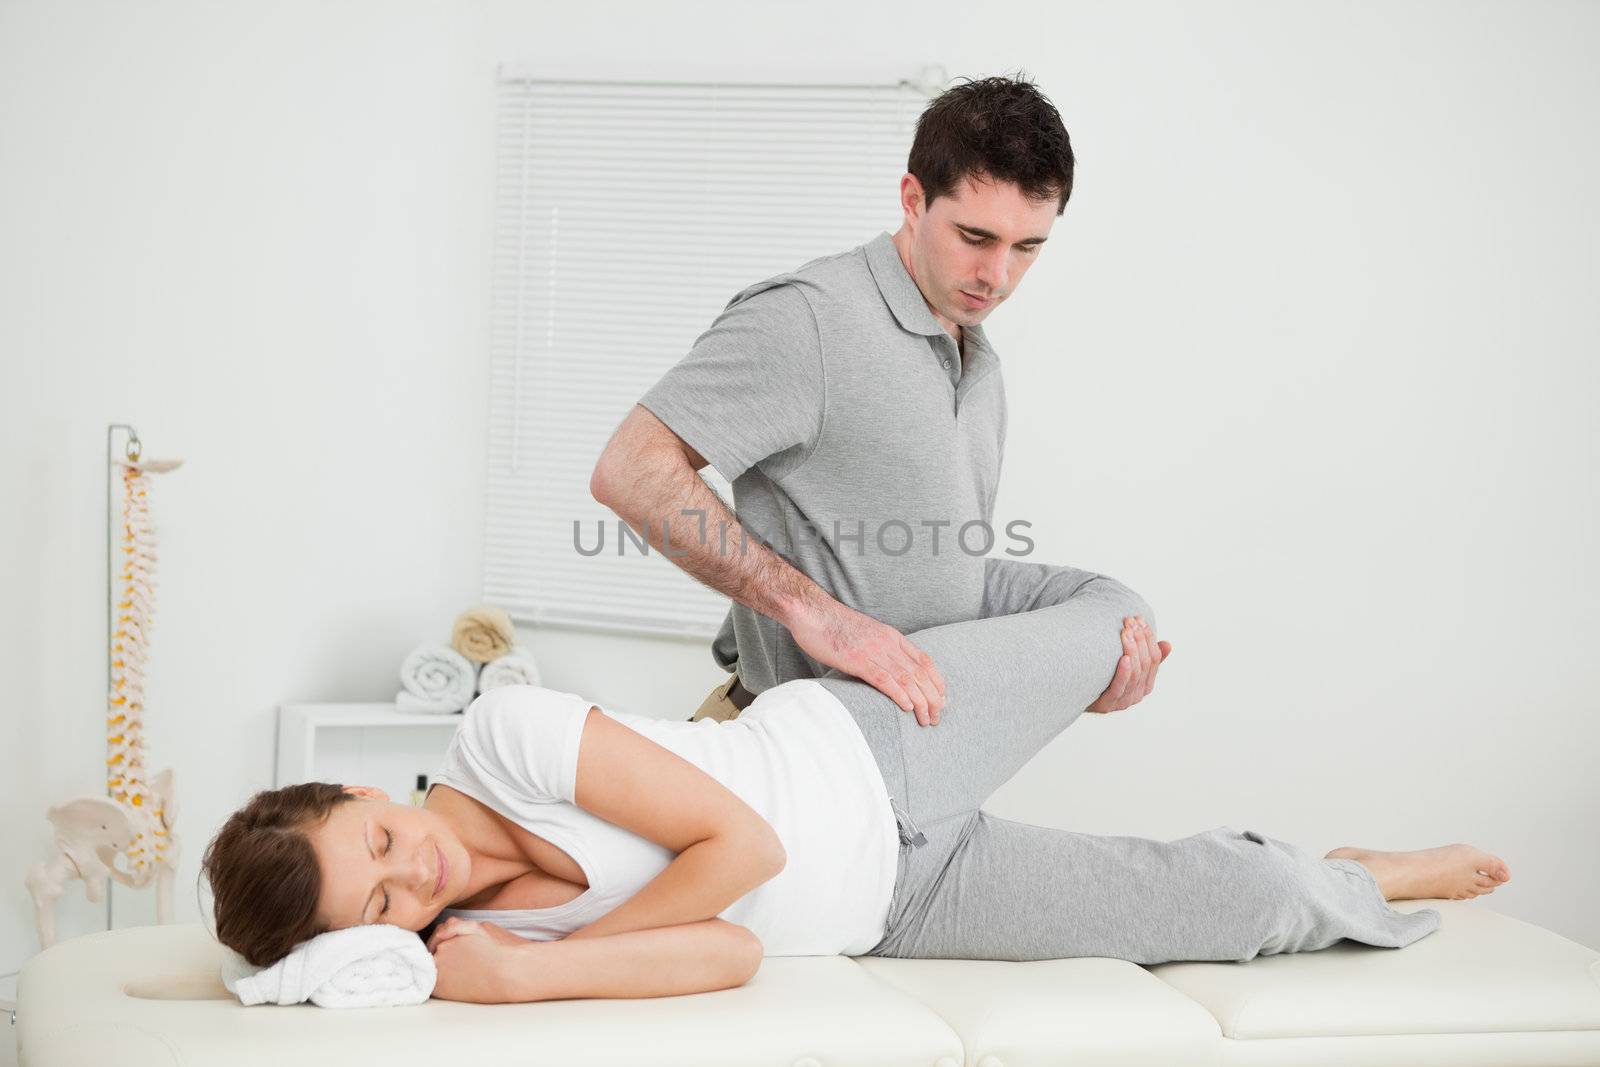 Leg of a woman being manipulated by a chiropractor in a medical room